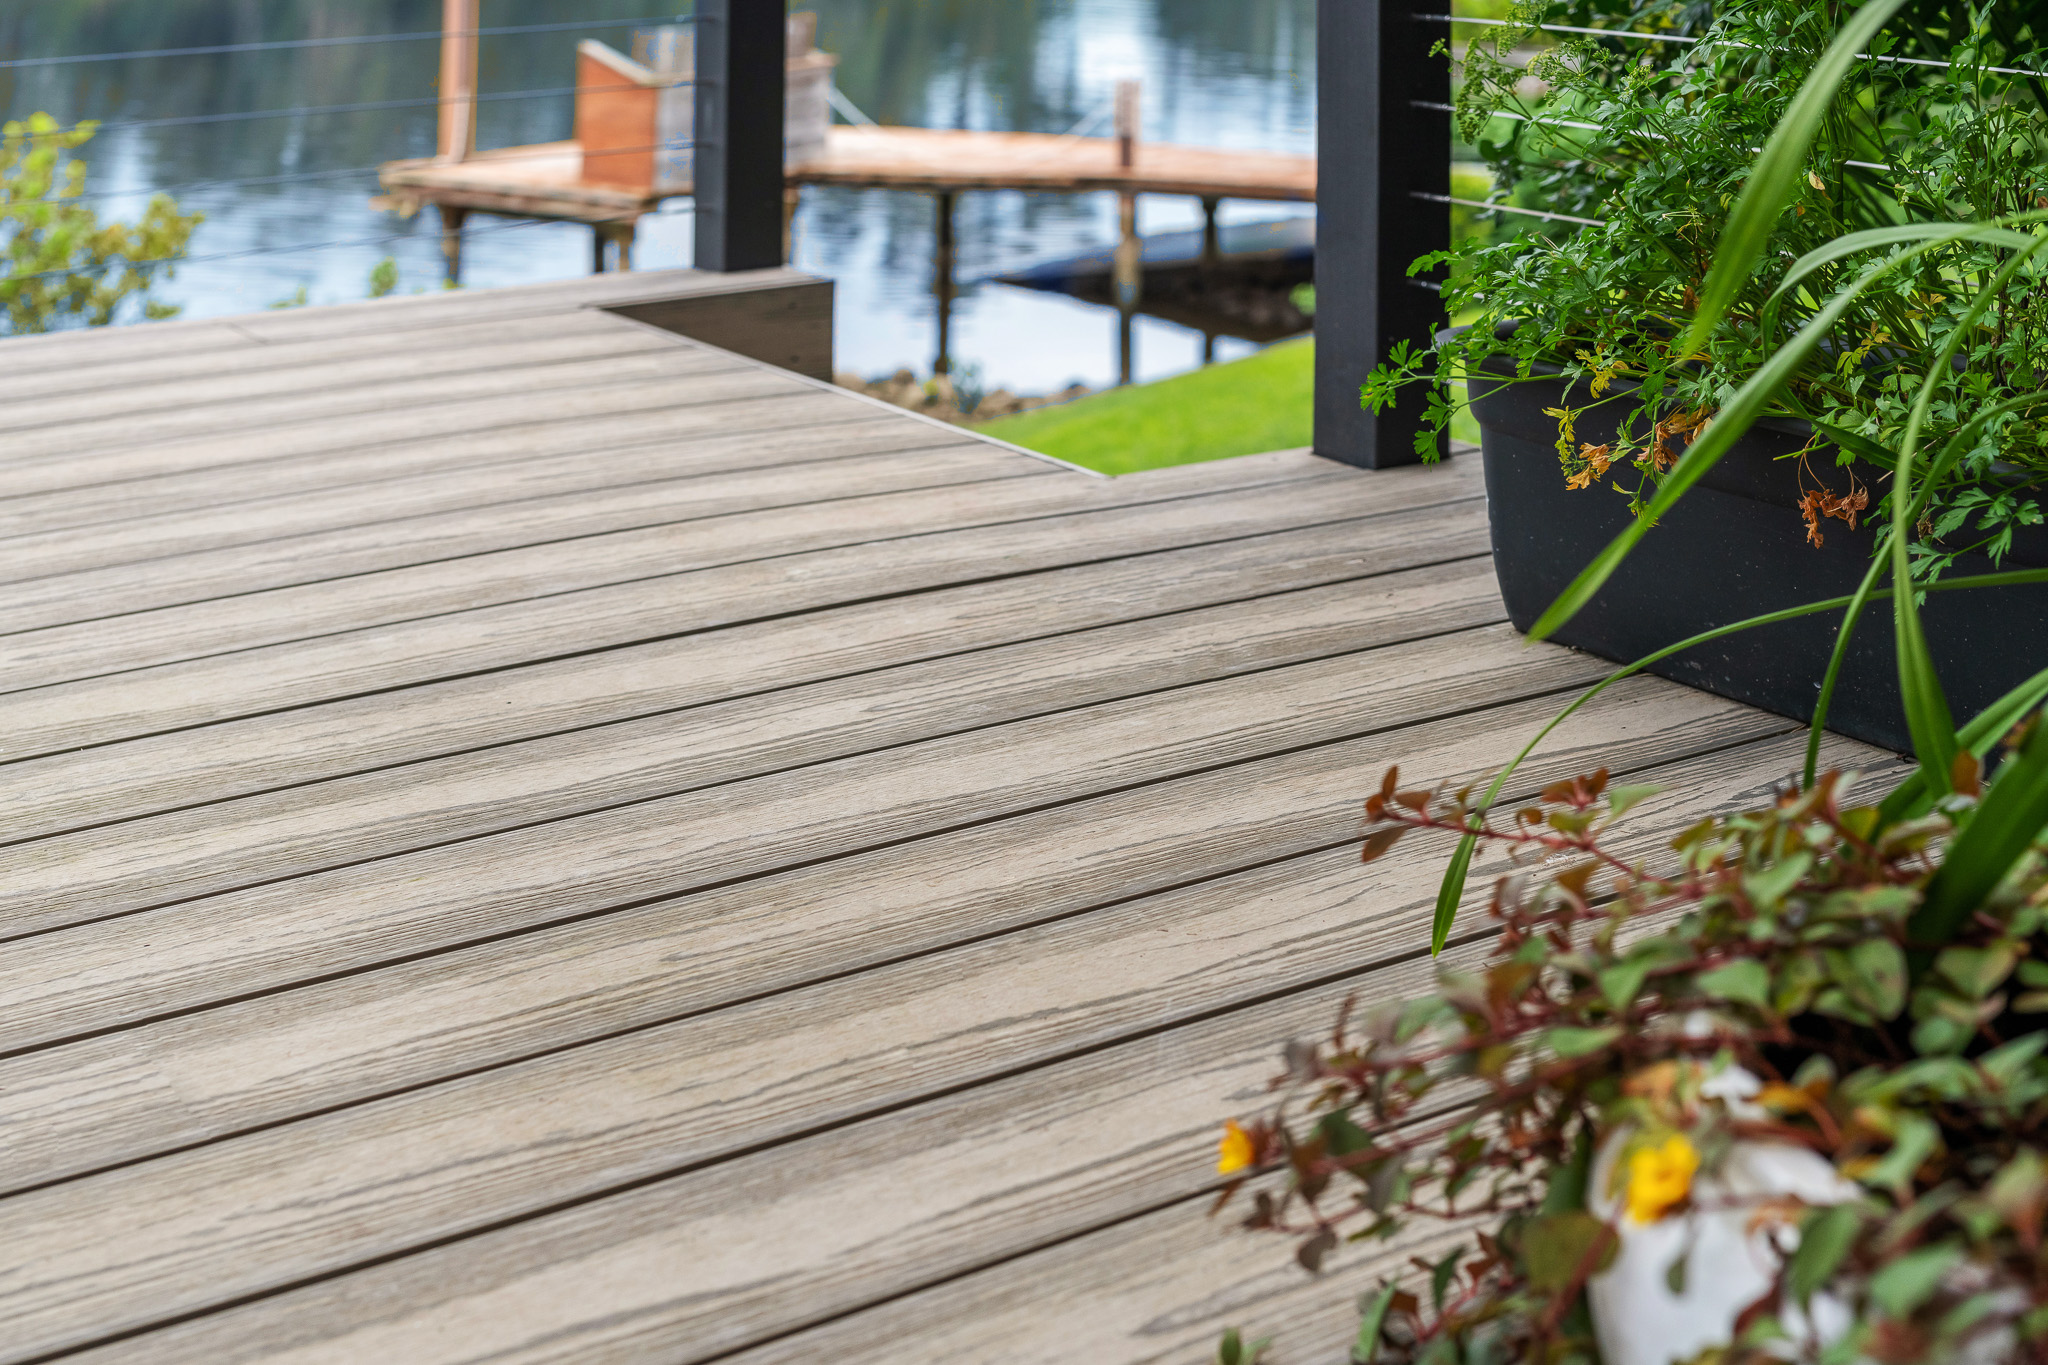 Titanium Composite Decking is a blend of PVC and wood composite